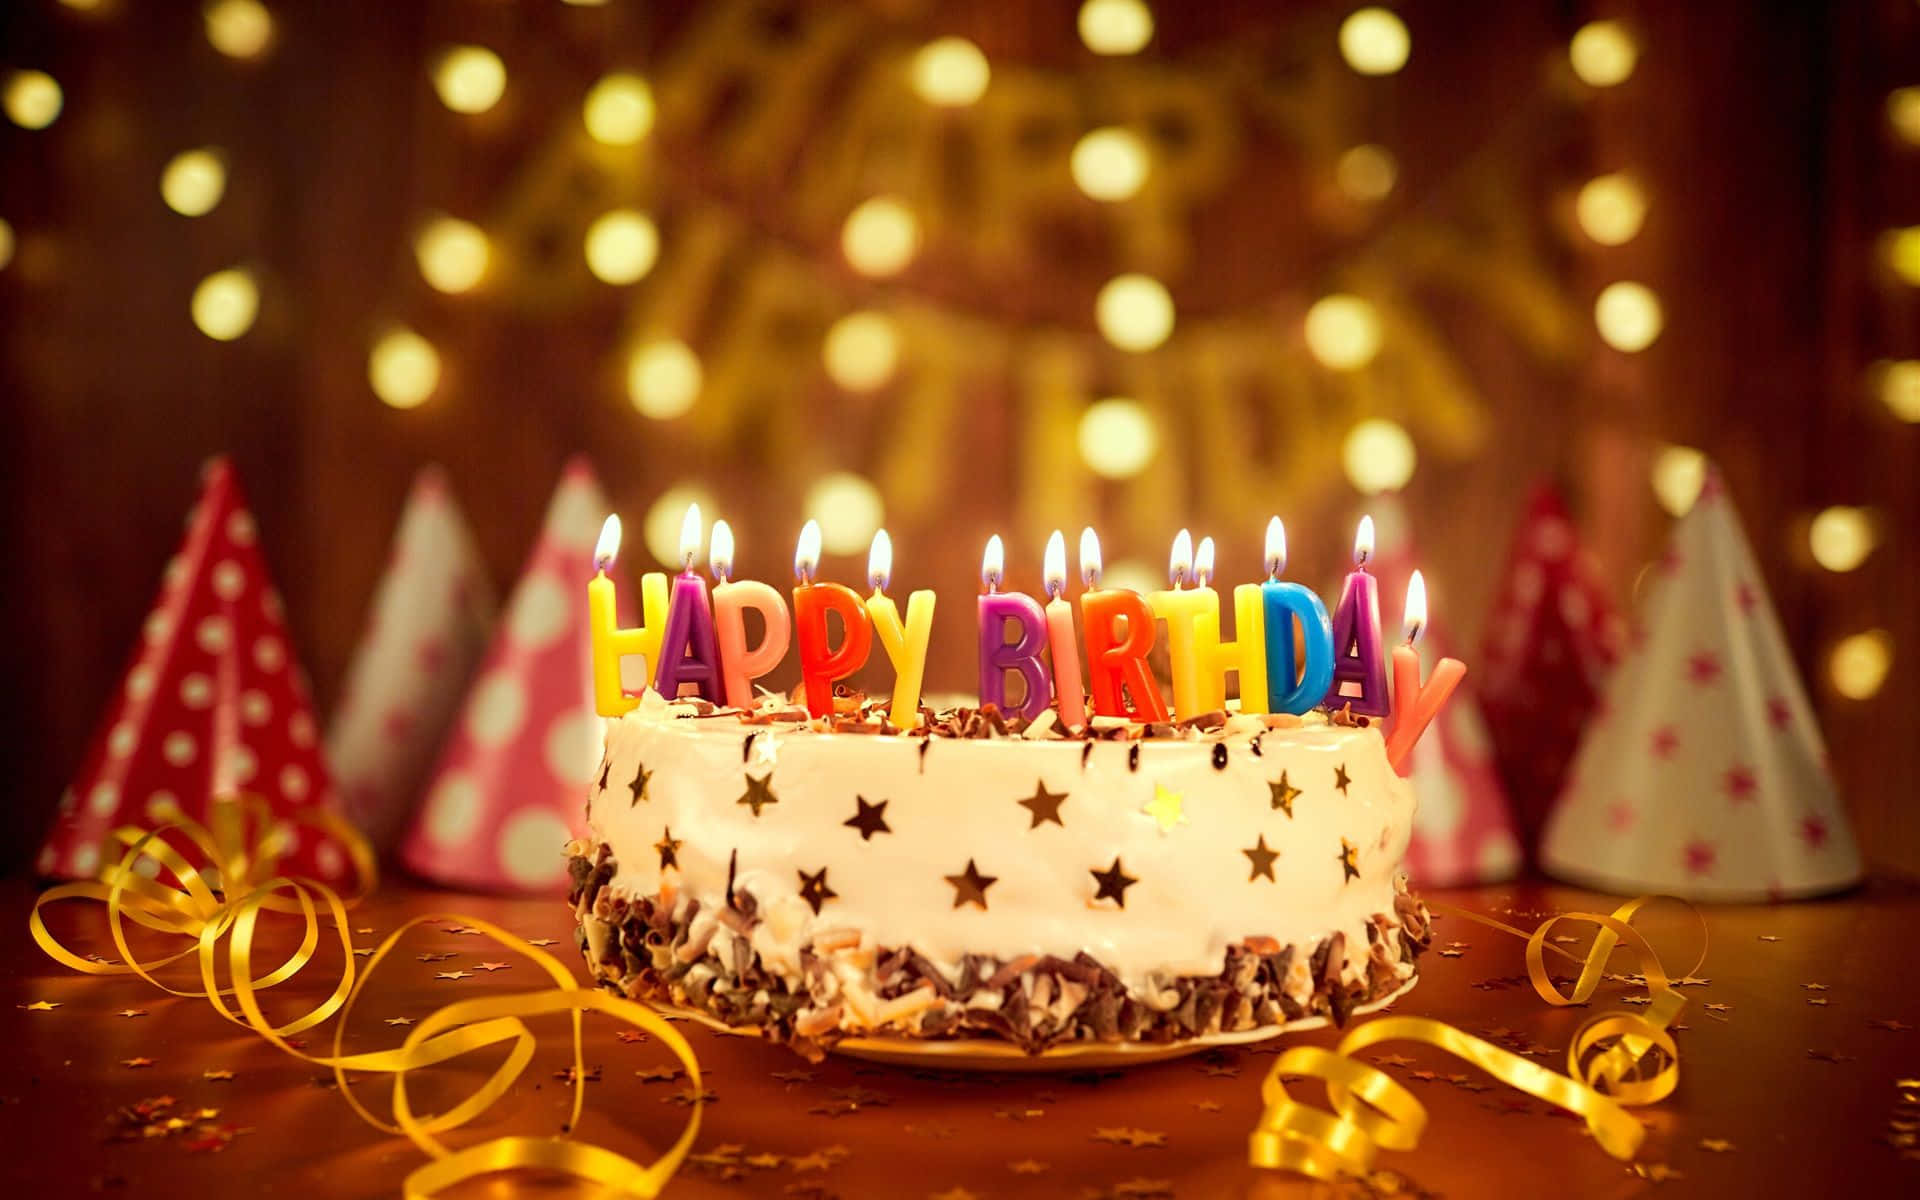 Birthday Cake On Wooden Table Background